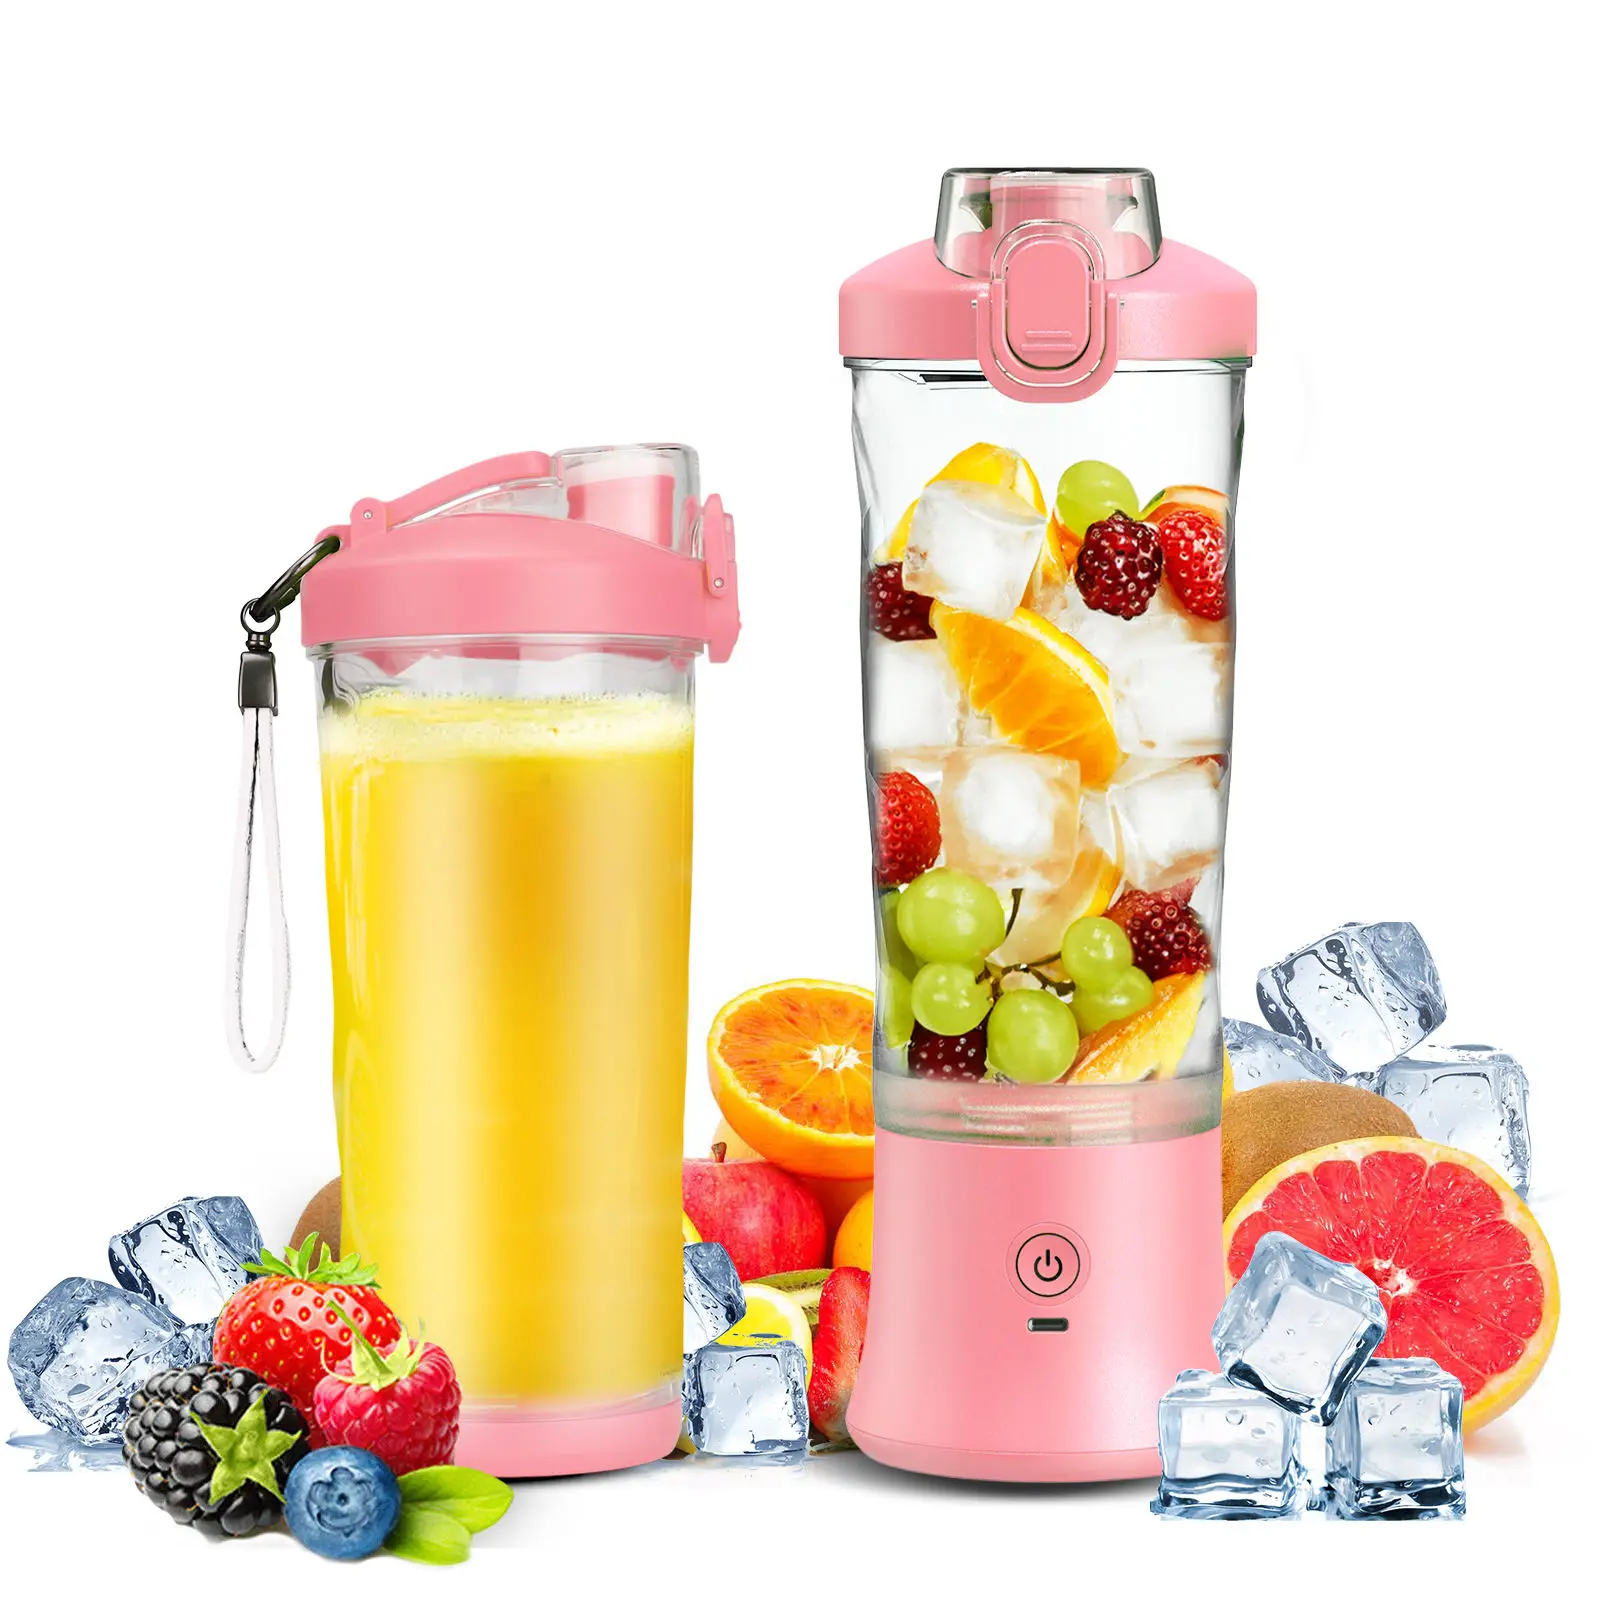 New 600ml Portable USB Mini Smoothie Blender Rechargeable Fruit & Vegetable Tools for Home Kitchen Accessories Juice Blender